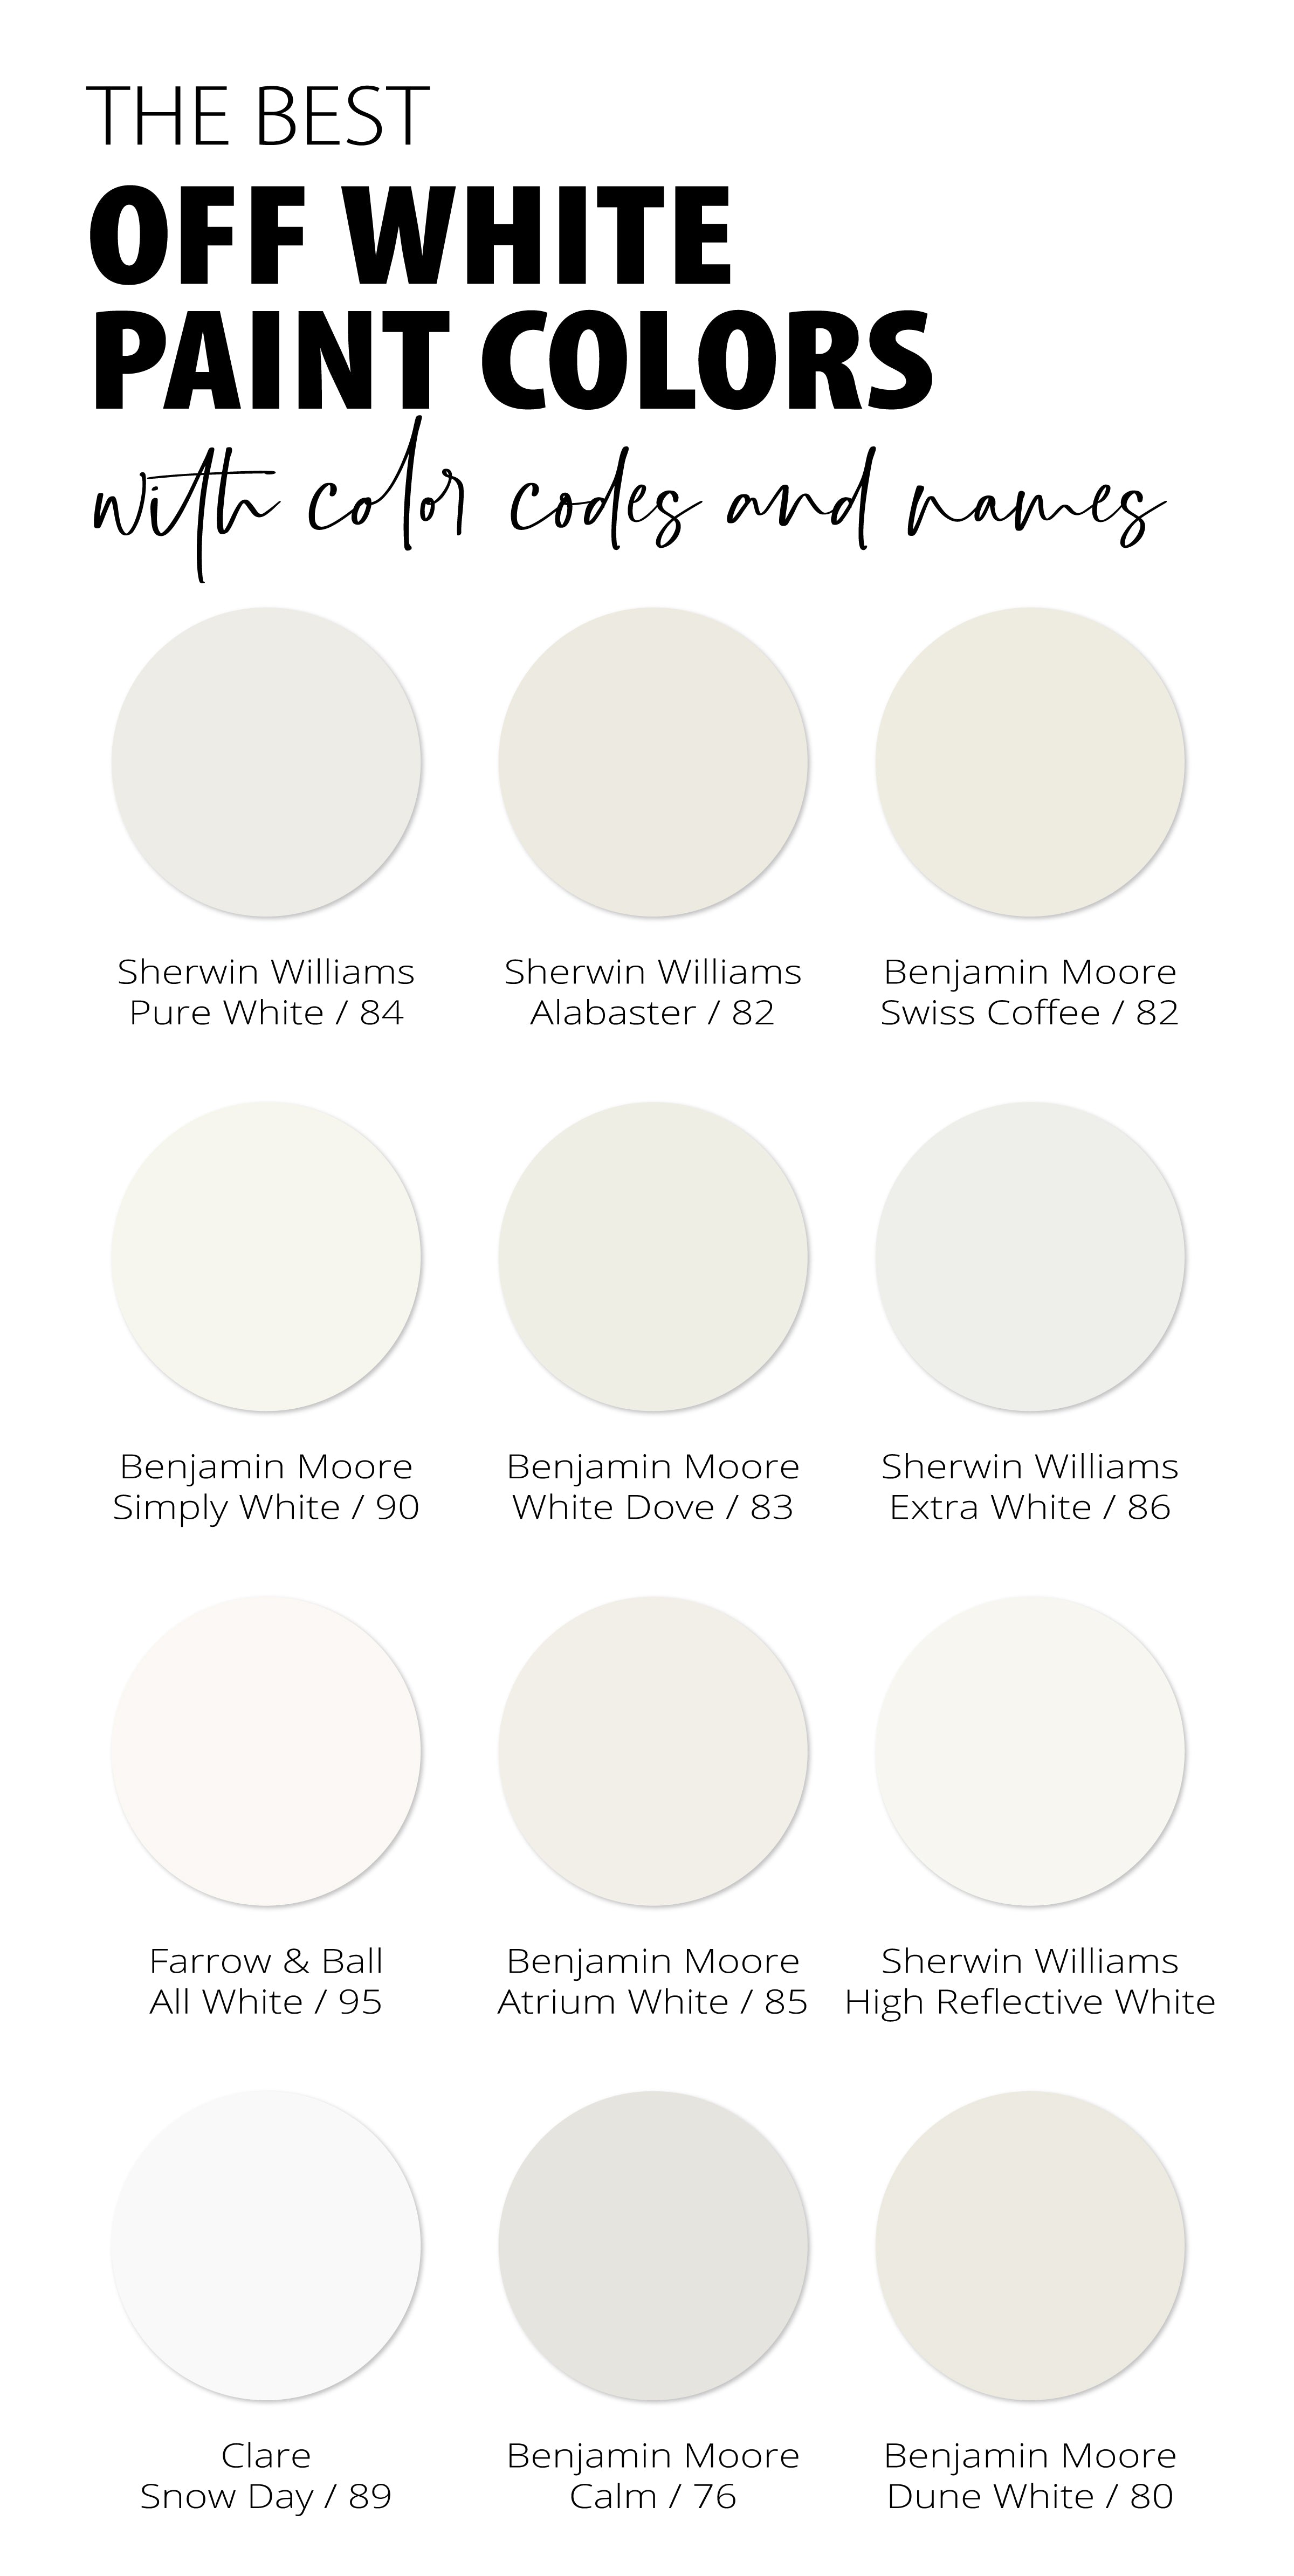 Best-Off-White-Paint-Colors-with-Names-Colors-and-LRV-values